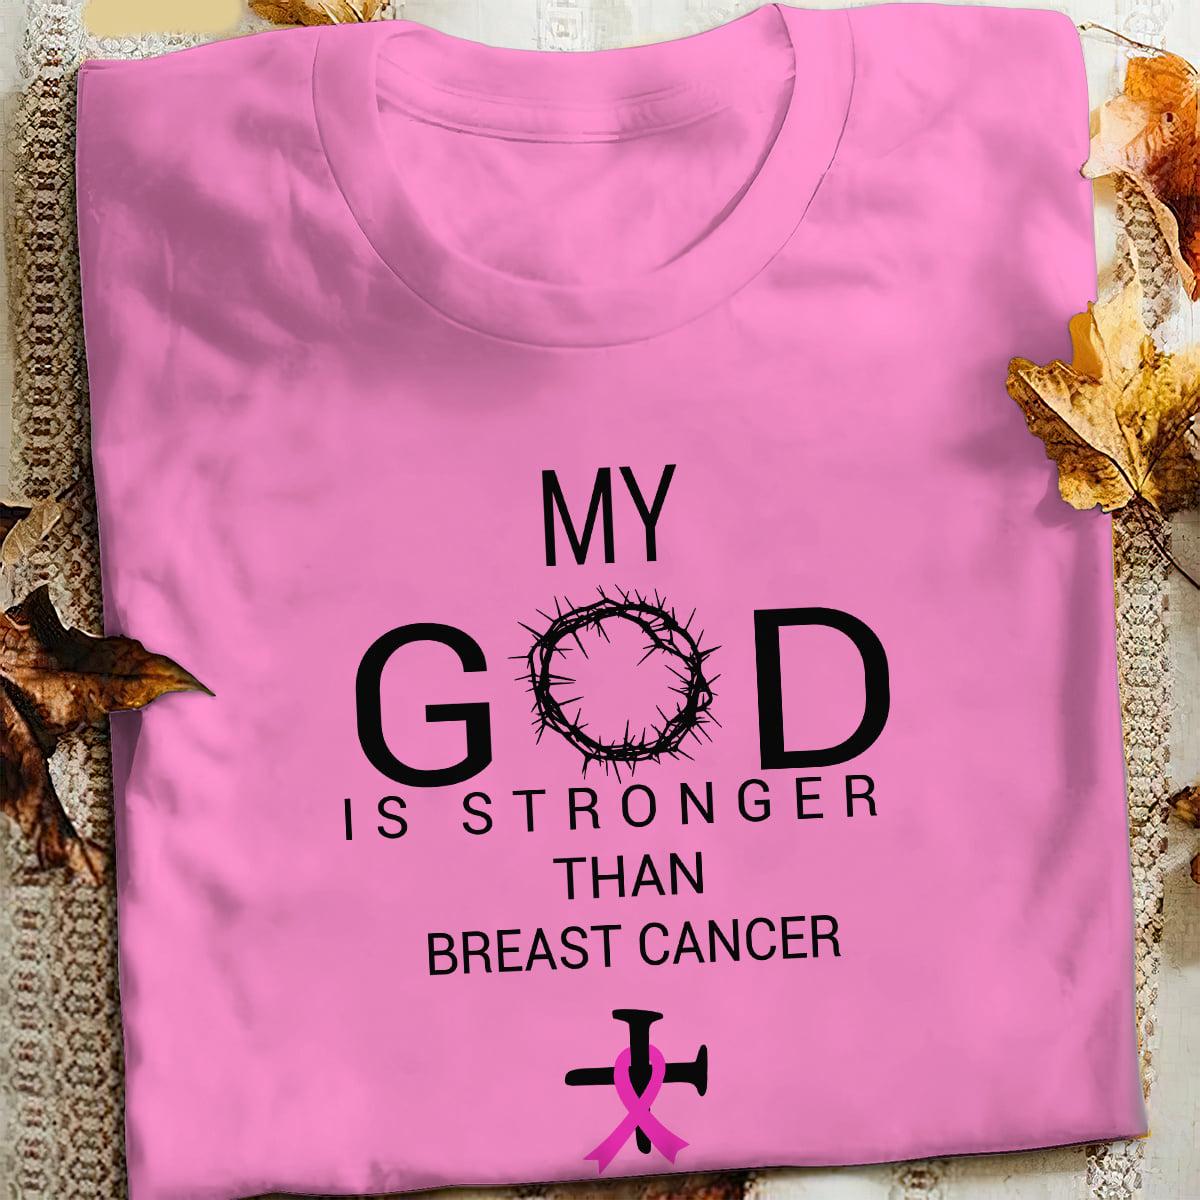 My god is stronger than breast cancer - Breast Cancer Awareness